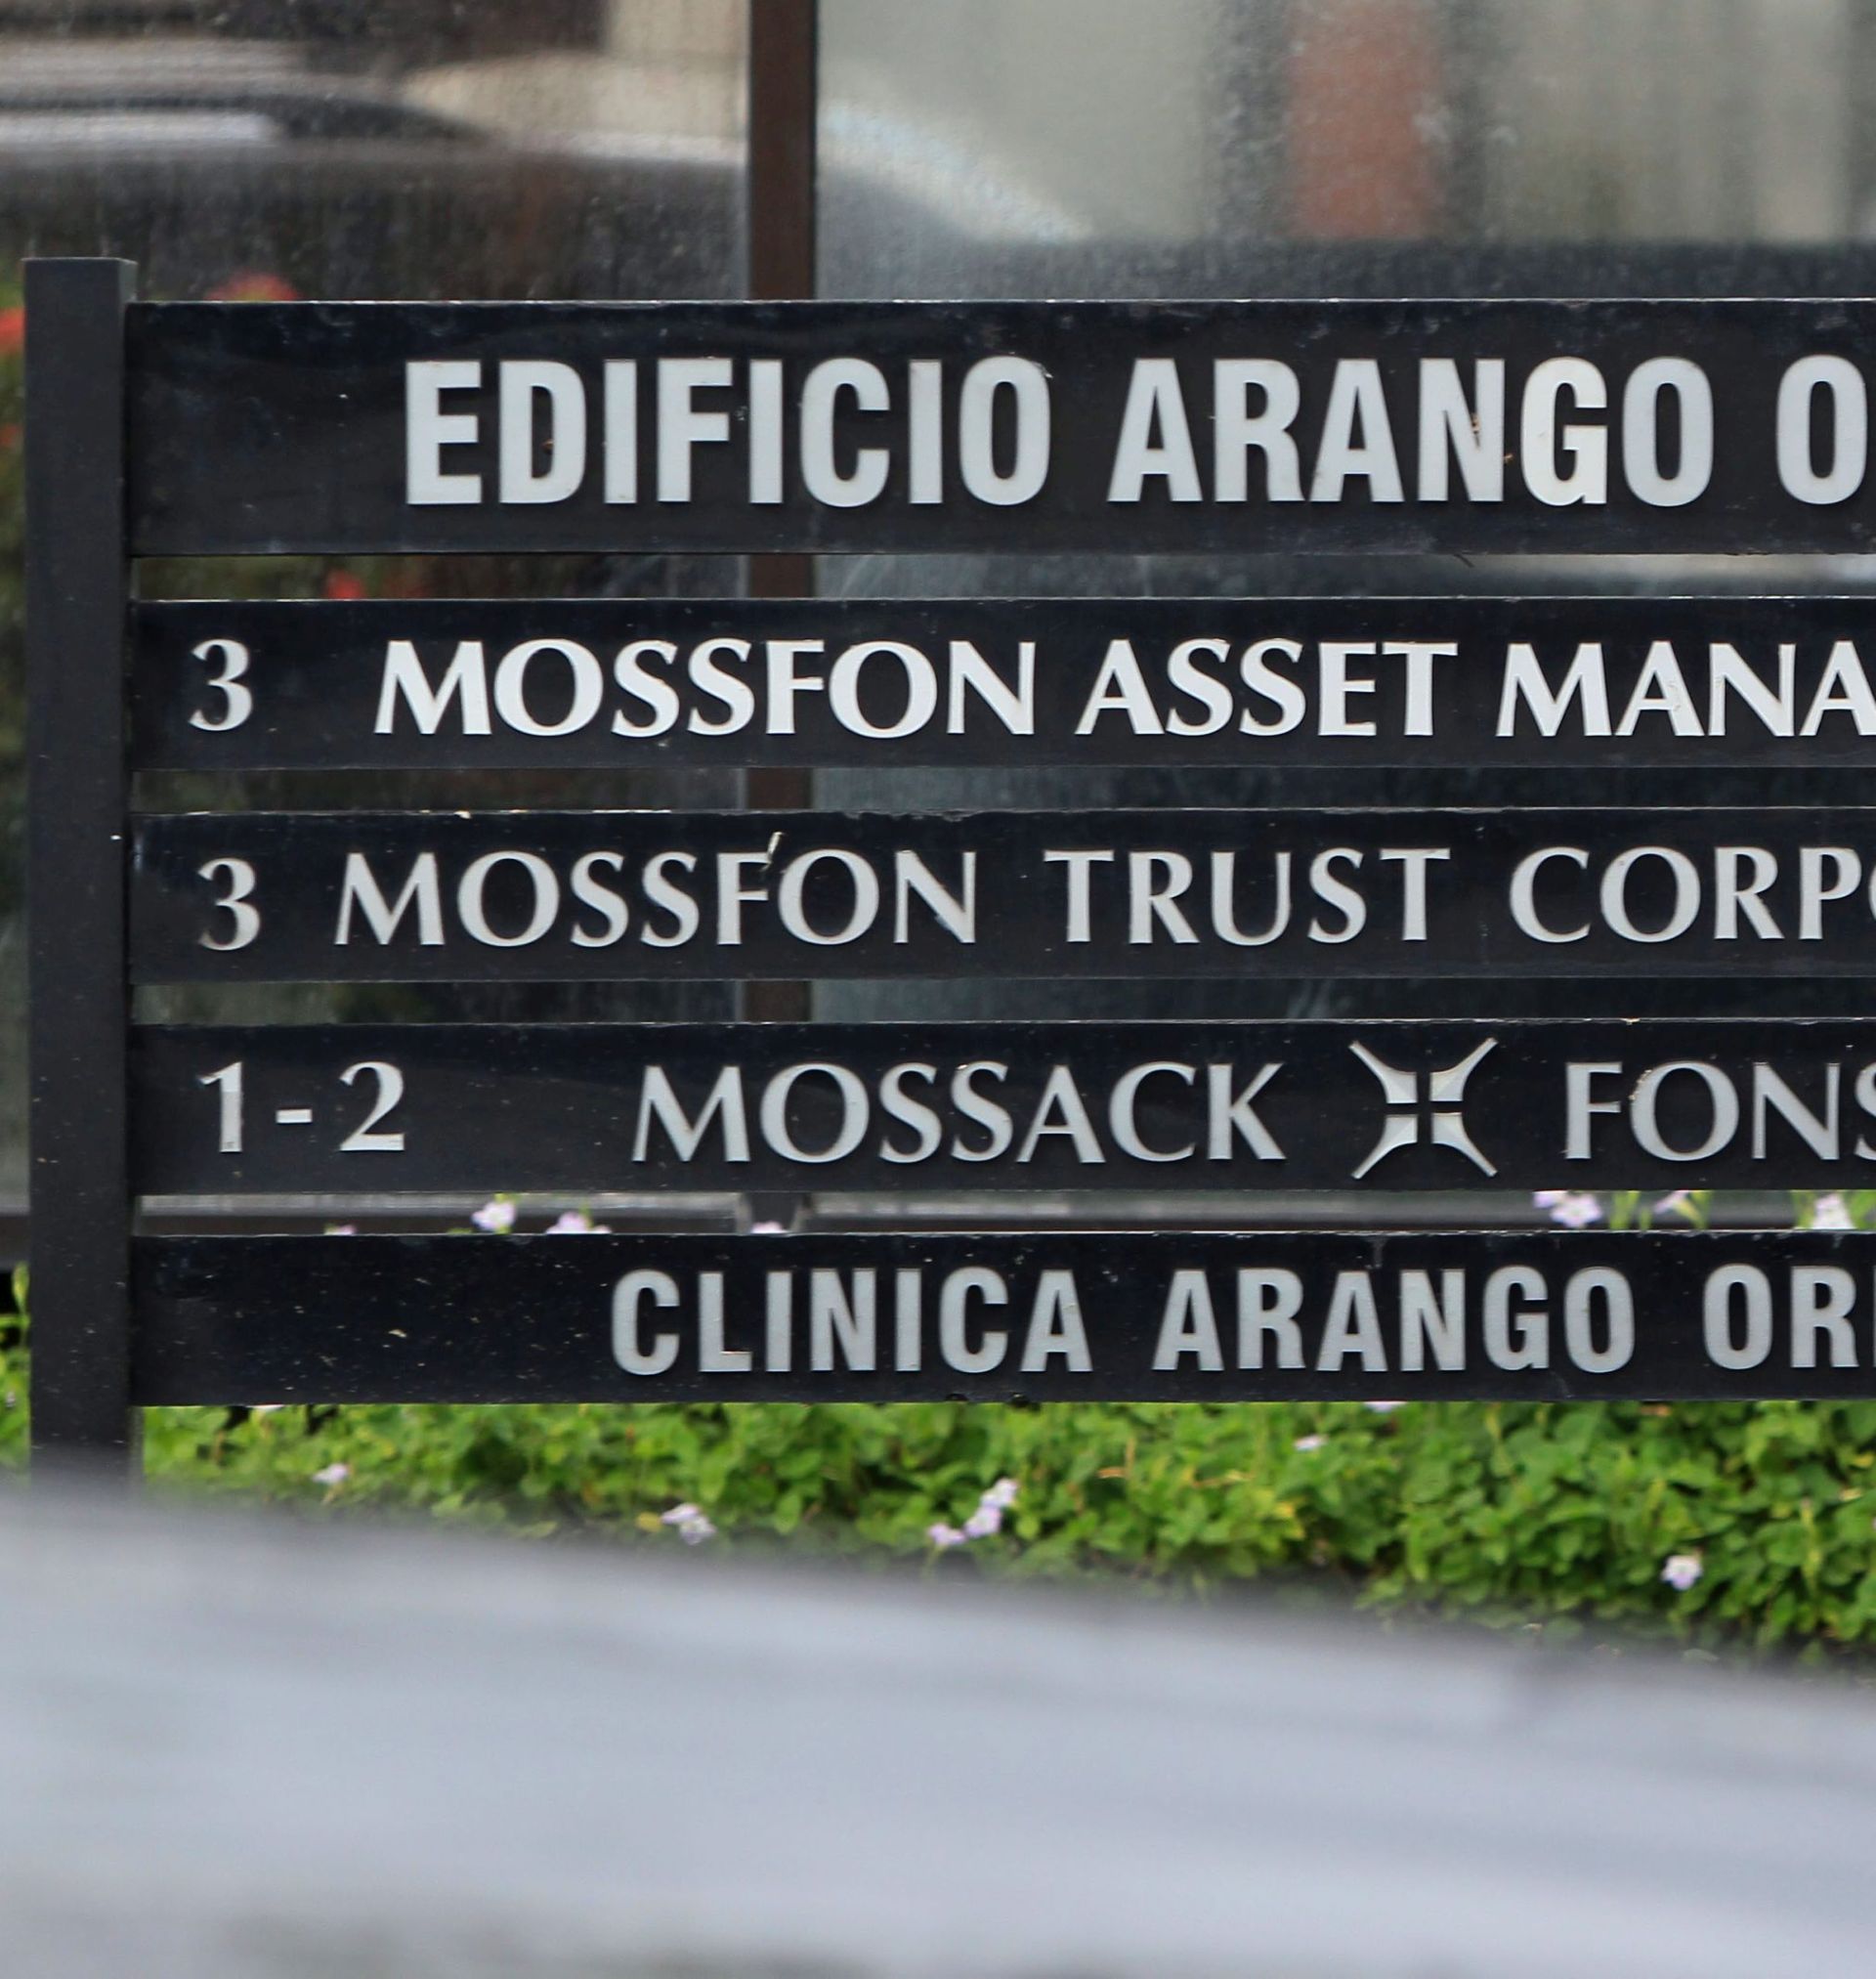 epa05256208 A private security guard outside the headquarters of Mossack Fonseca firm, in Panama City, Panama, 12 April 2016. Panama's Prosecutor office raided the headquarters of Mossack Fonseca as part of a regular investigation opened after the Panama Papers leak.  EPA/Alejandro Bolivar